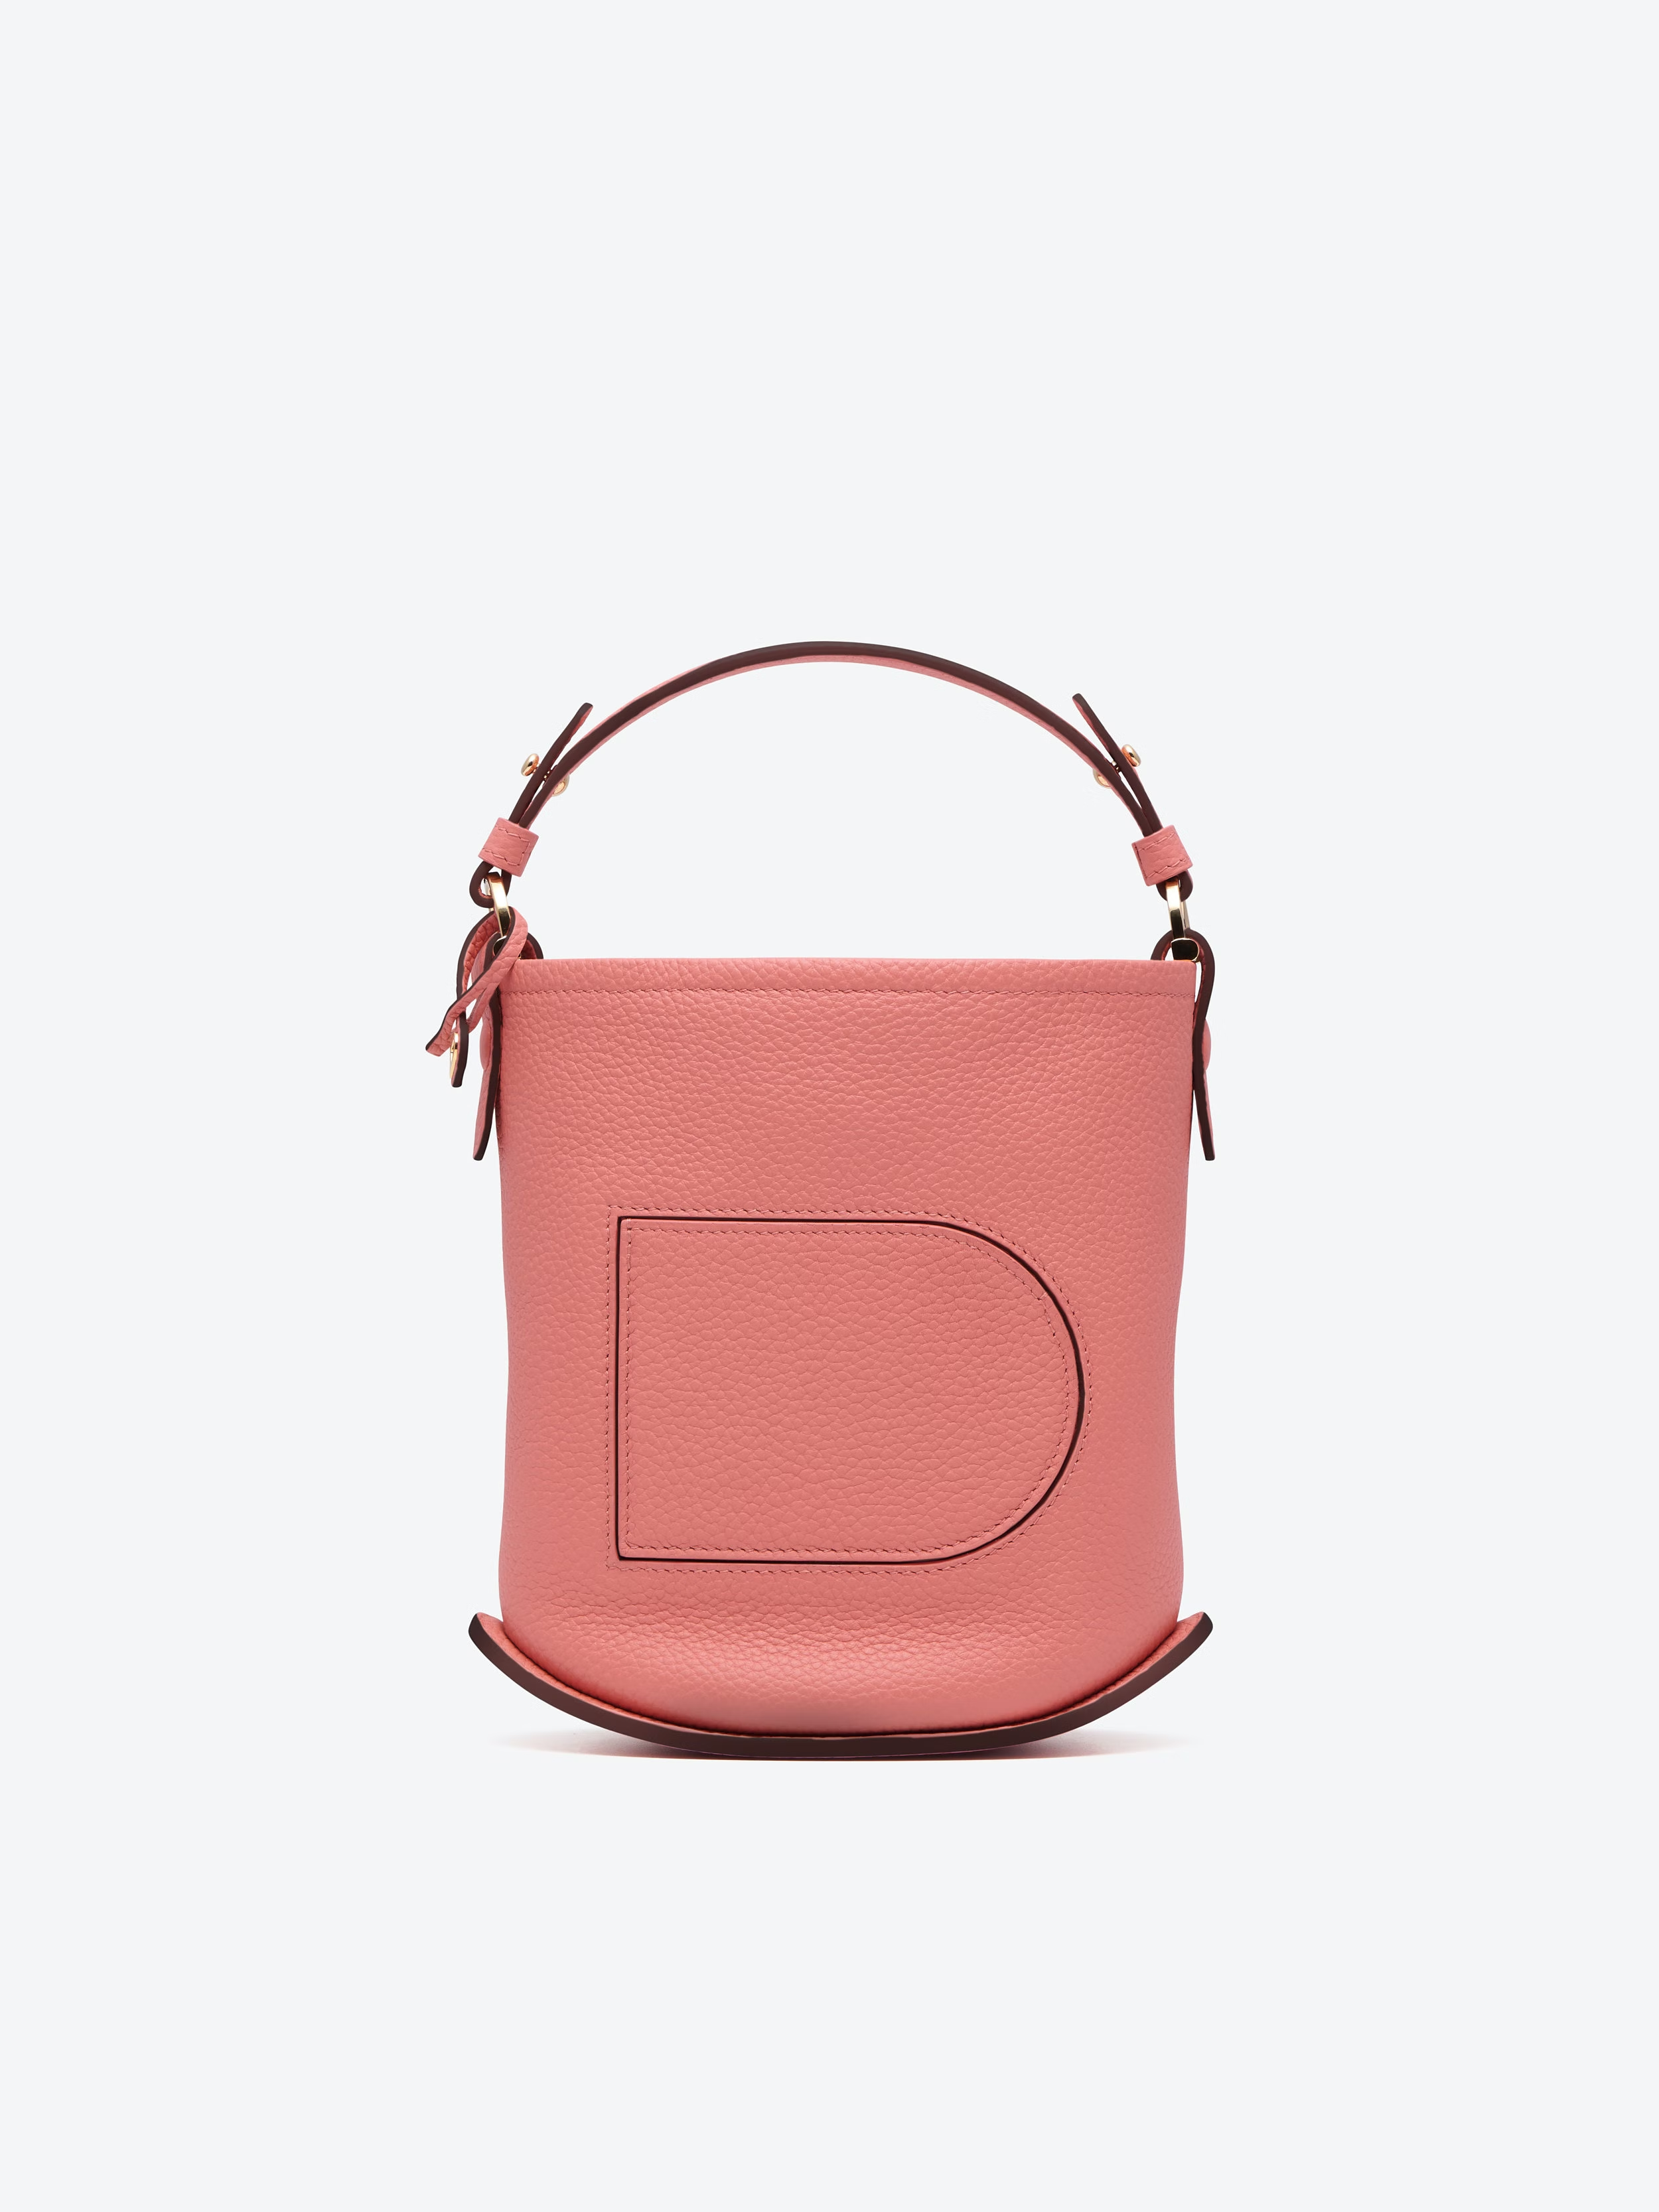 Delvaux's revisits the classics with Delvaux Diary collection